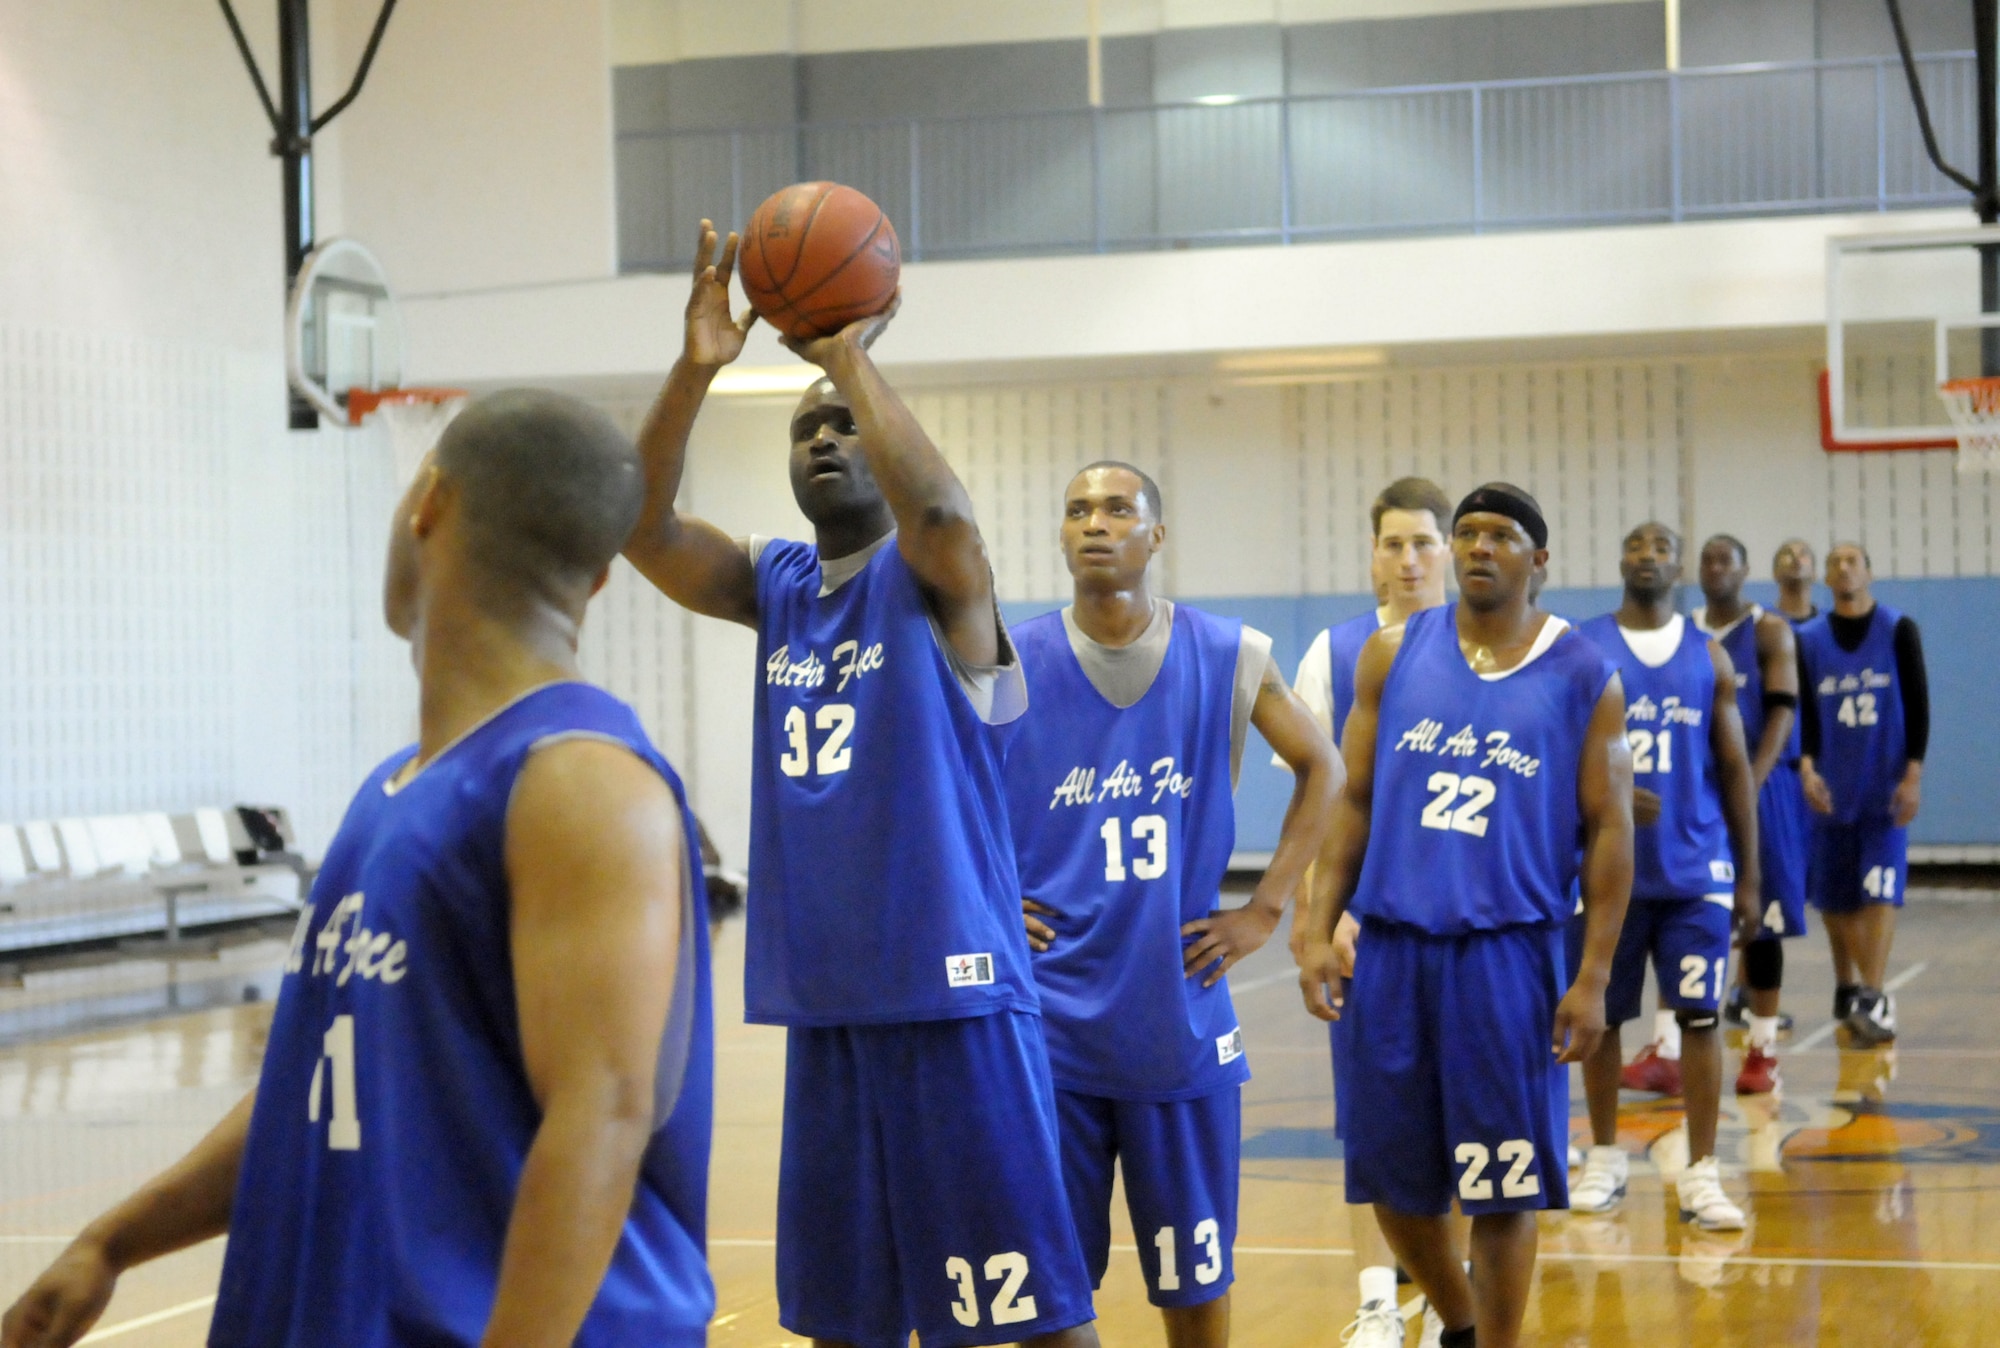 Players line up for a drill during try-out camp for the All-Air Force men's basketball team at the Robins Fitness Center gym April 22. U. S. Air Force photo by Sue Sapp